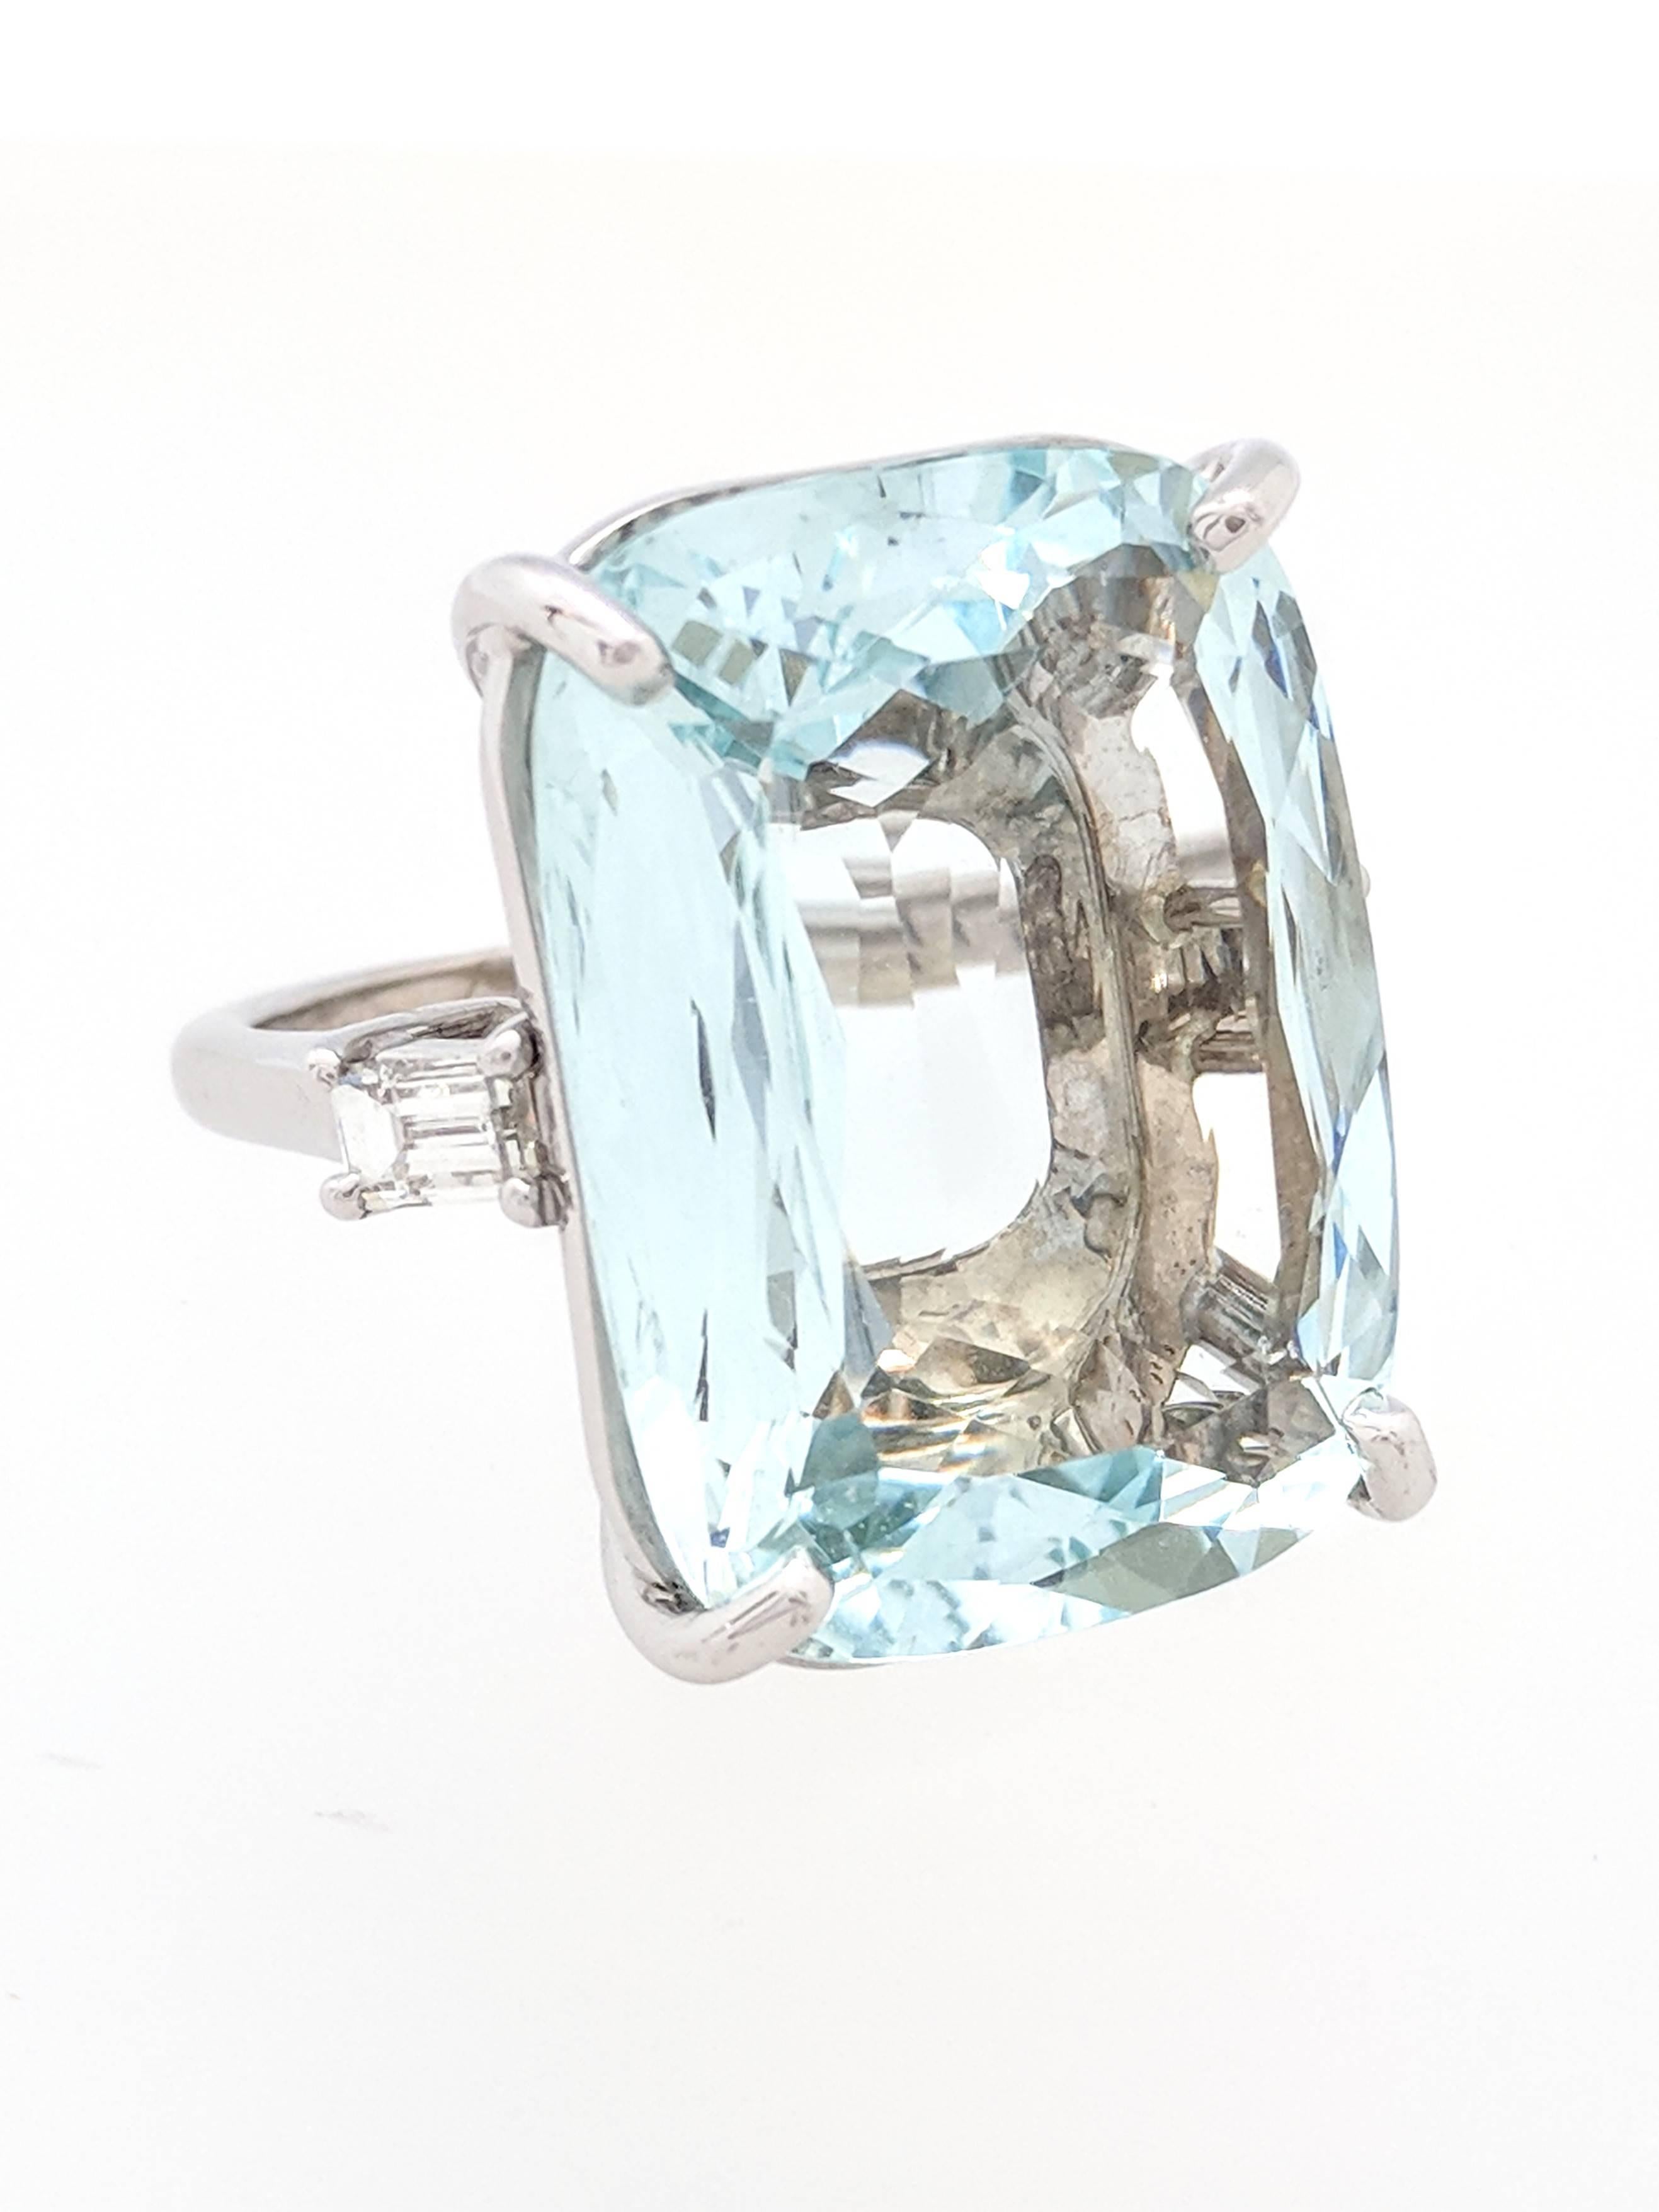 18KWG 26.18ct Natural Beryl Cushion Cut Aquamarine & Diamond Ring GIA CERTIFIED

You are viewing a beautiful custom 26.18ct. natural beryl Aquamarine and Diamond Ring. This Aquamarine is certified by GIA (Gemological Institute of America).

The